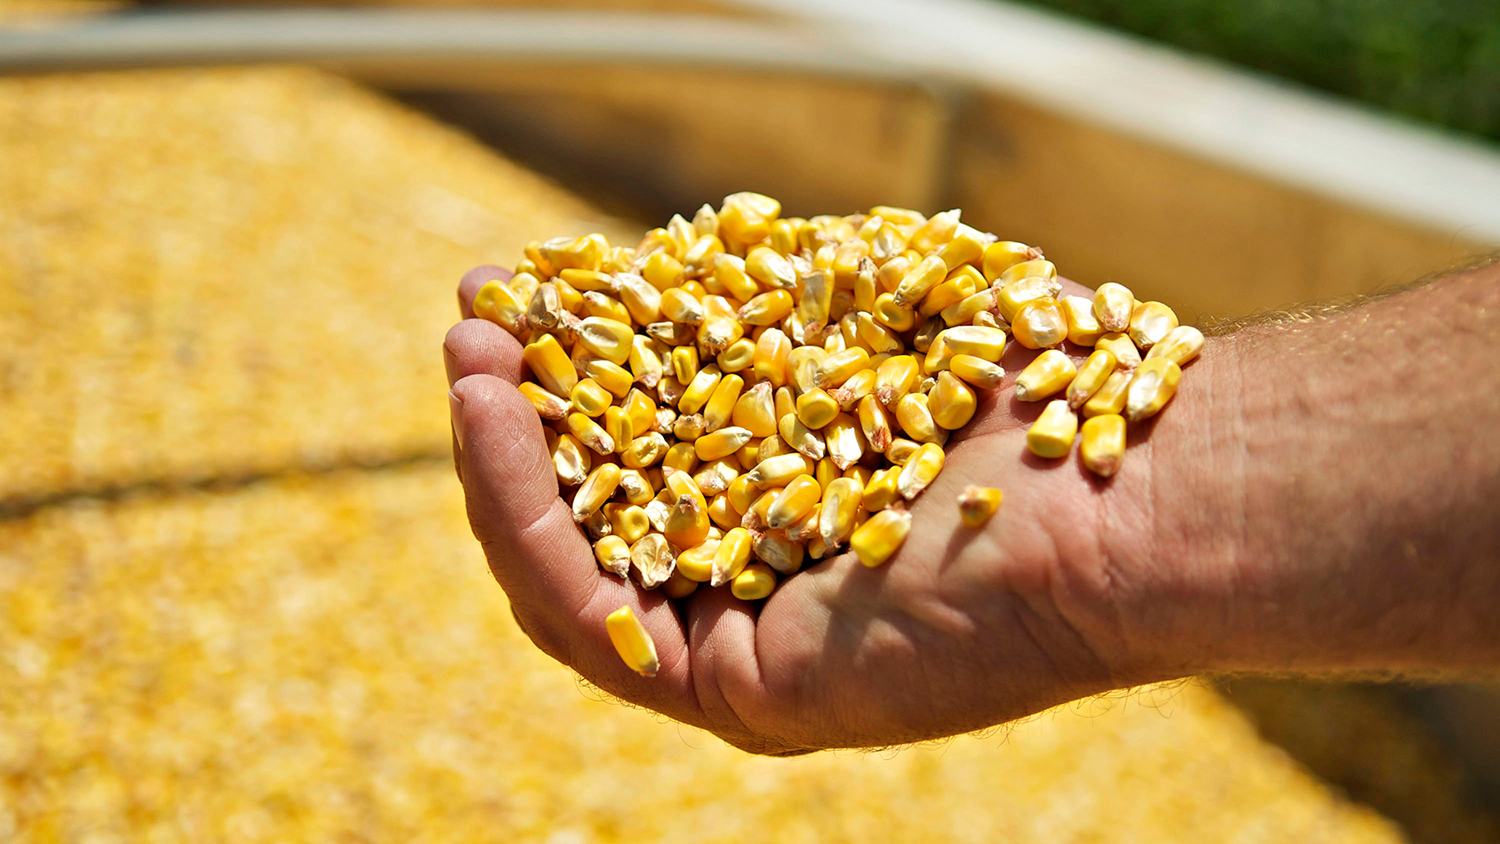 Farmer Mike Vis holds a handful of corn on his farm in Valley Springs, South Dakota, U.S., on Tuesday, July 8, 2008.
